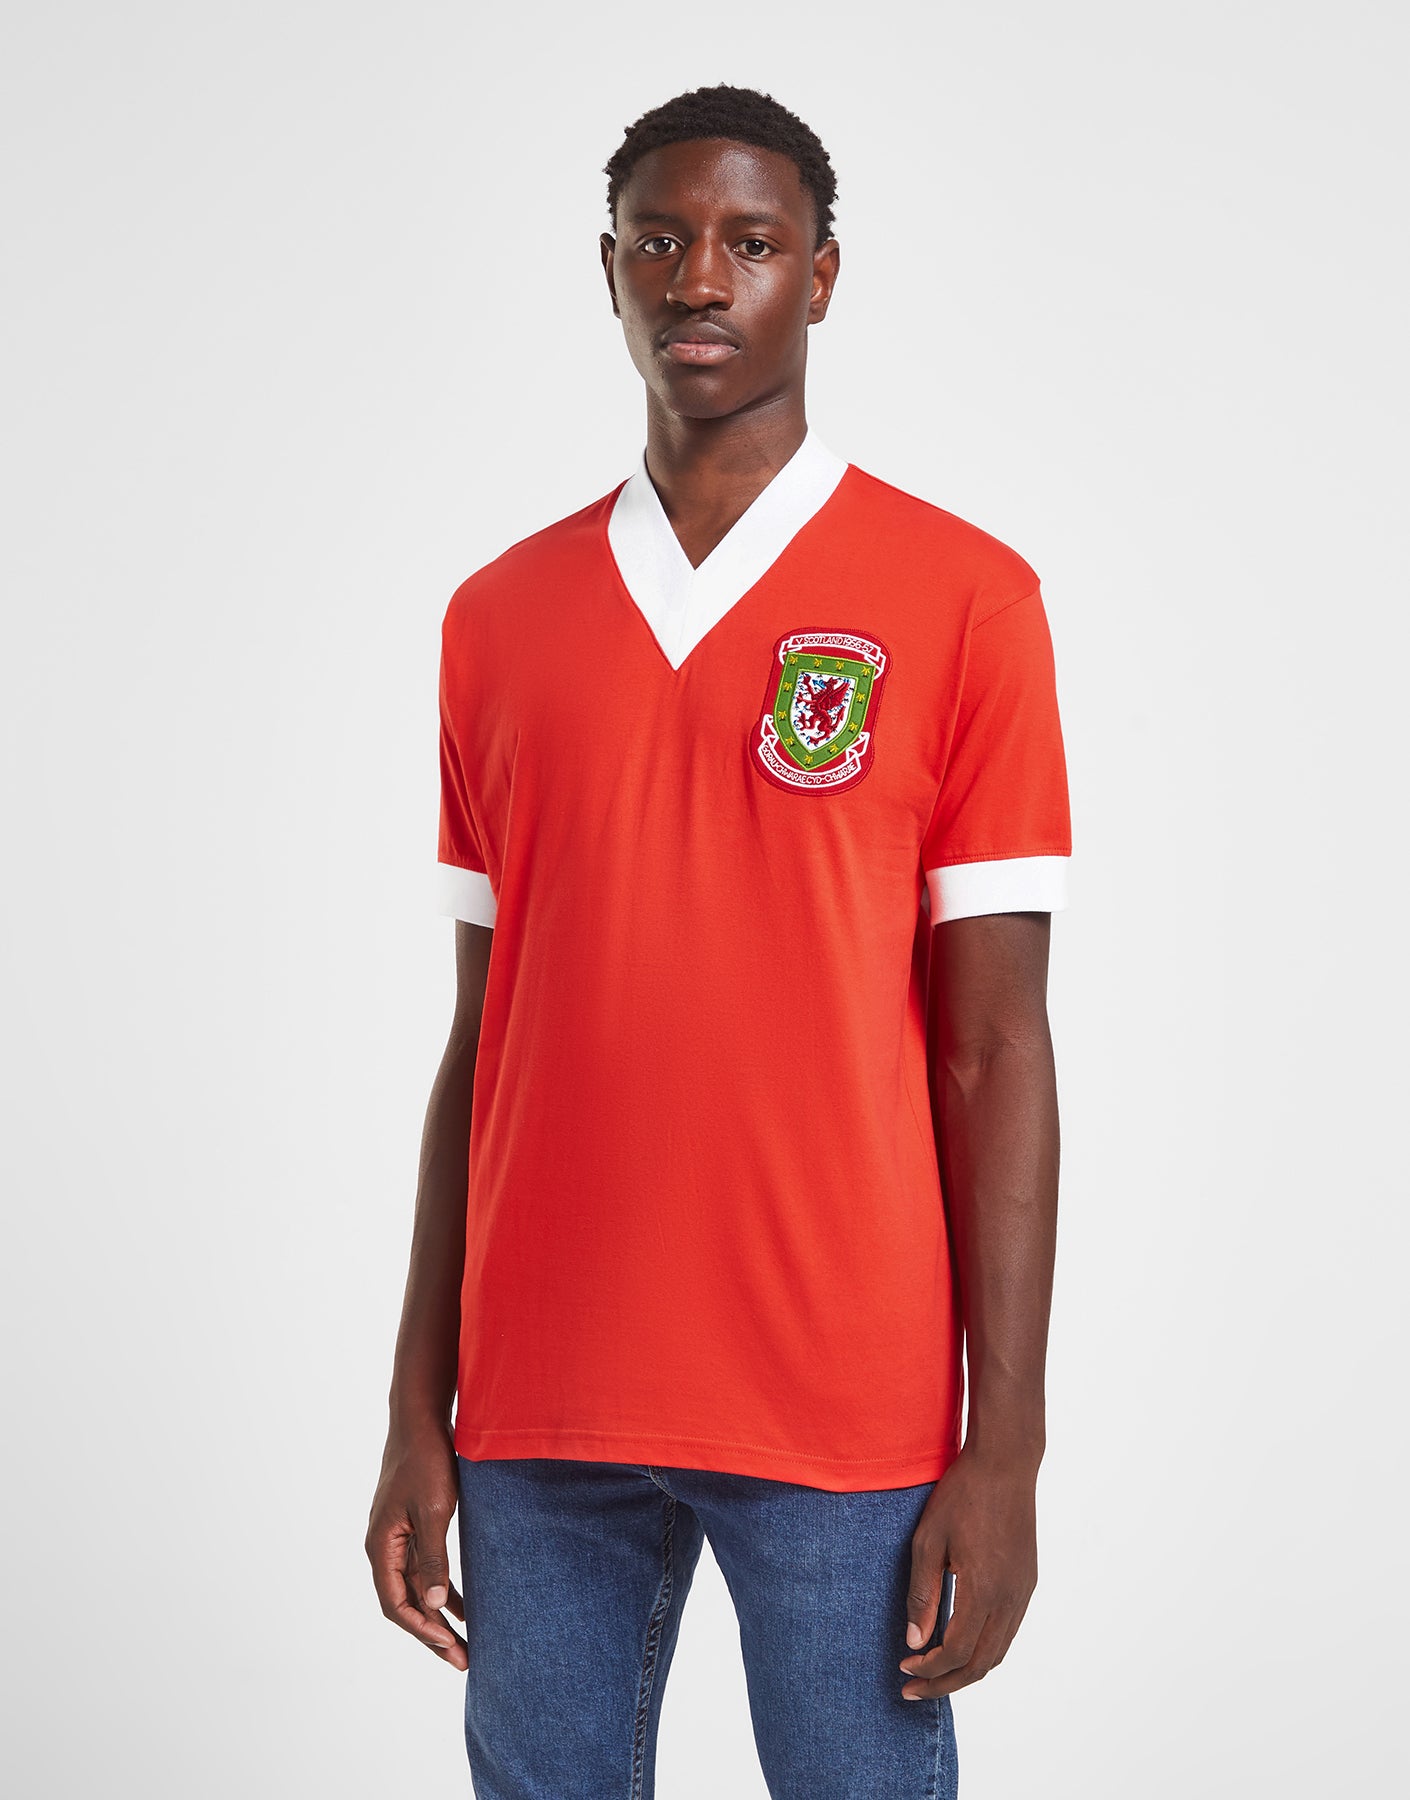 Official Team Wales 1958 Retro Jersey - Red